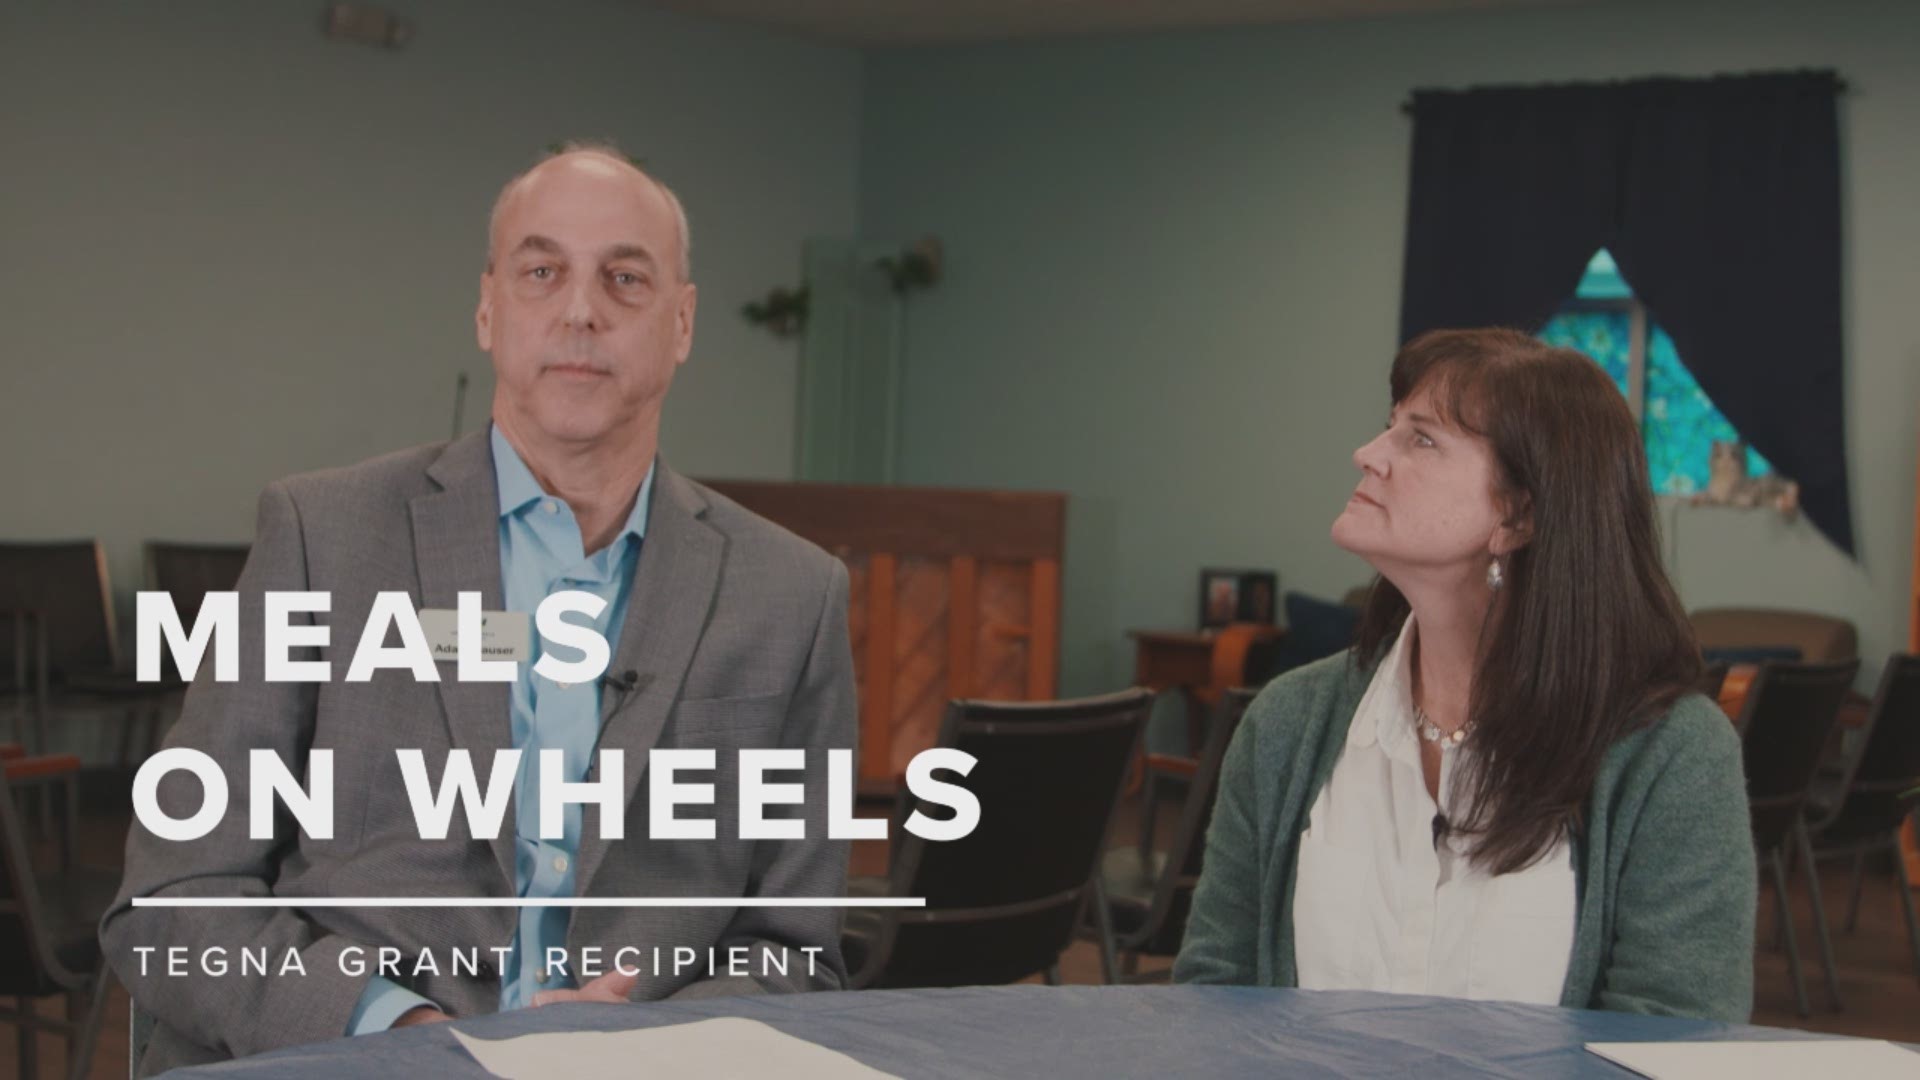 Interview with Meals on Wheels' CEO & President Adam Hauser and Program Manager Nora Salinas